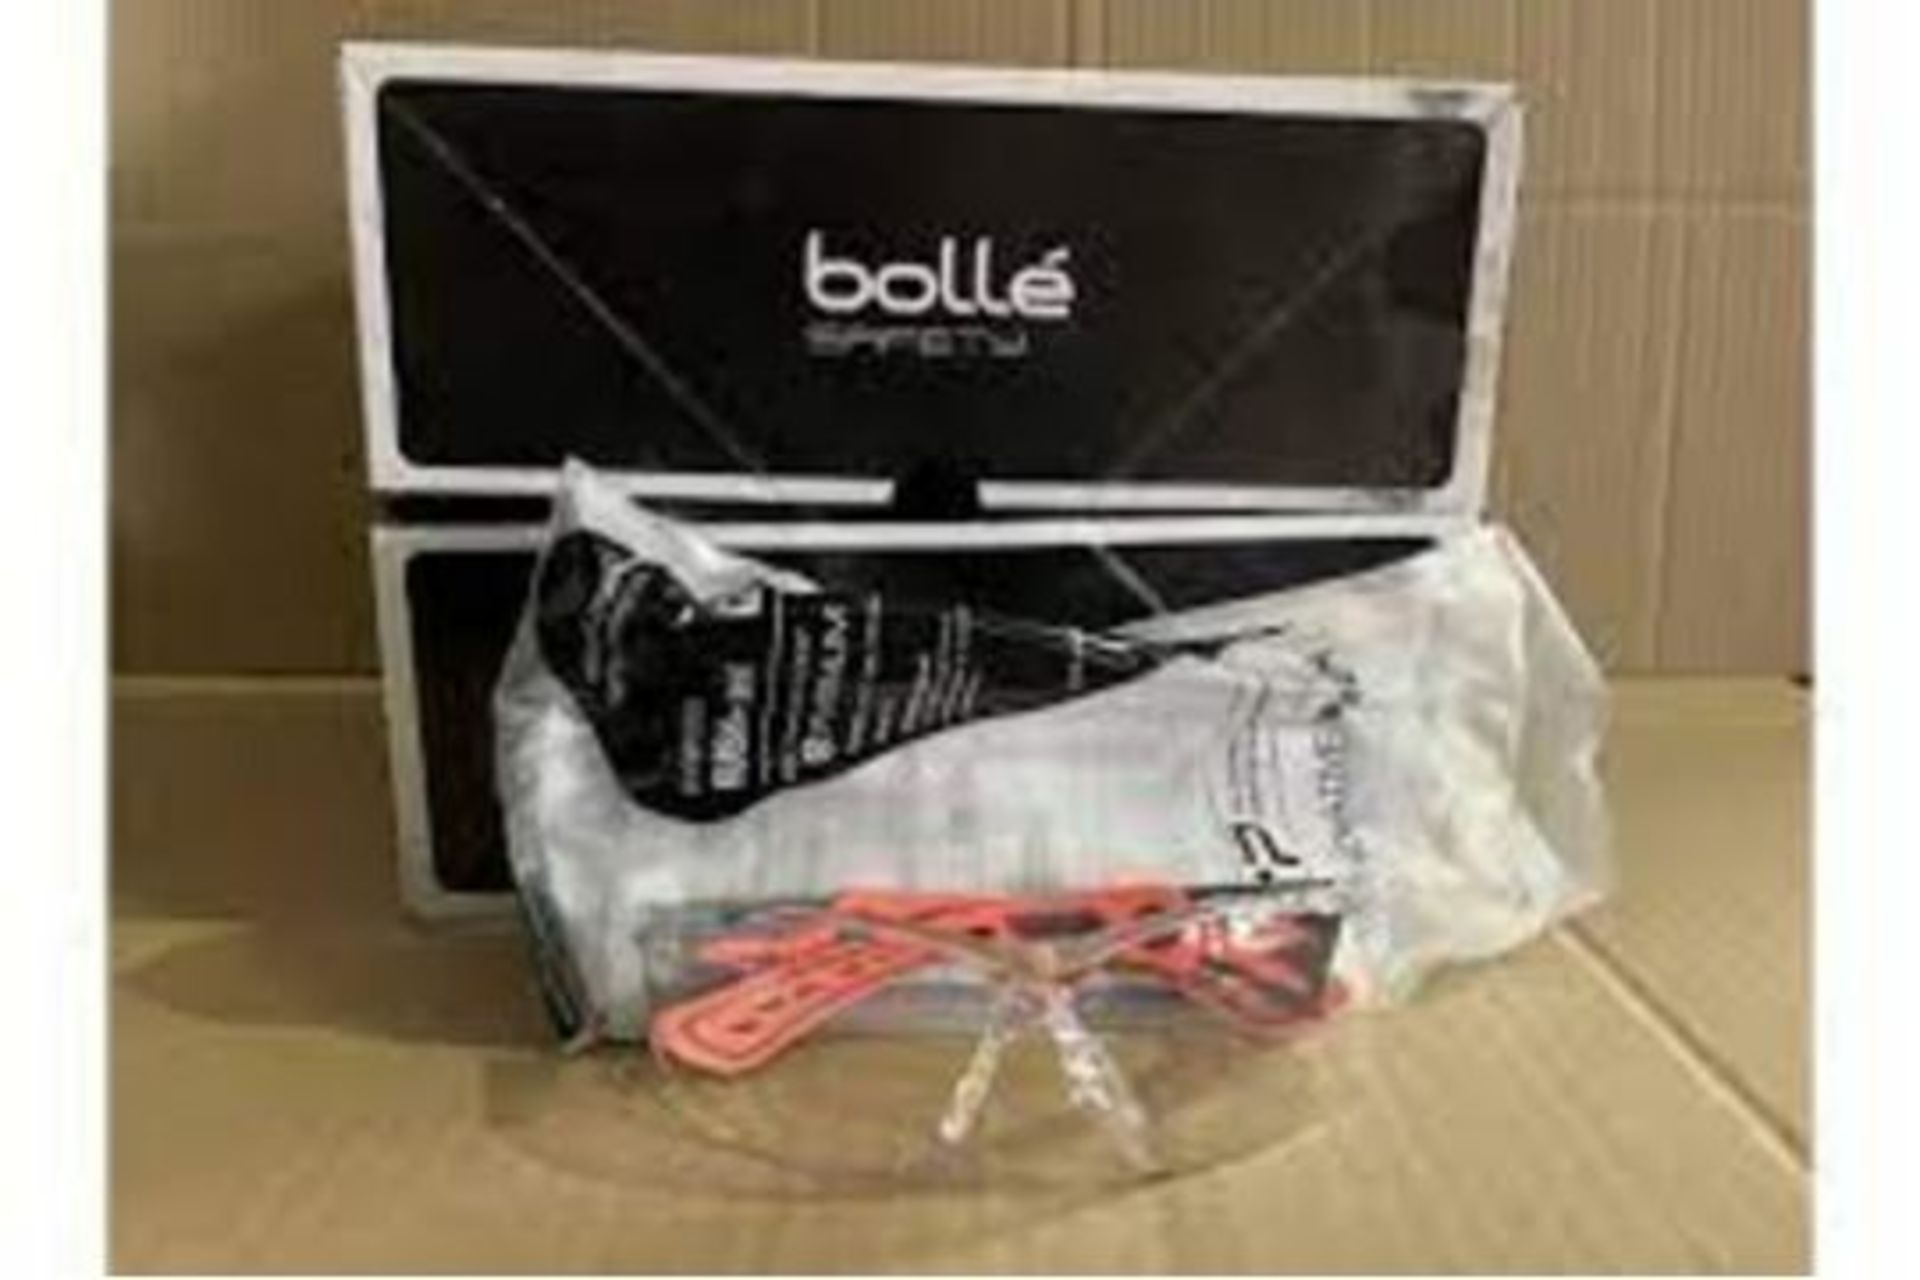 10 X BRAND NEW BOLLE SAFETY OVERLIGHT PROTECTIVE EYEWEAR RRP £14 EACH R15